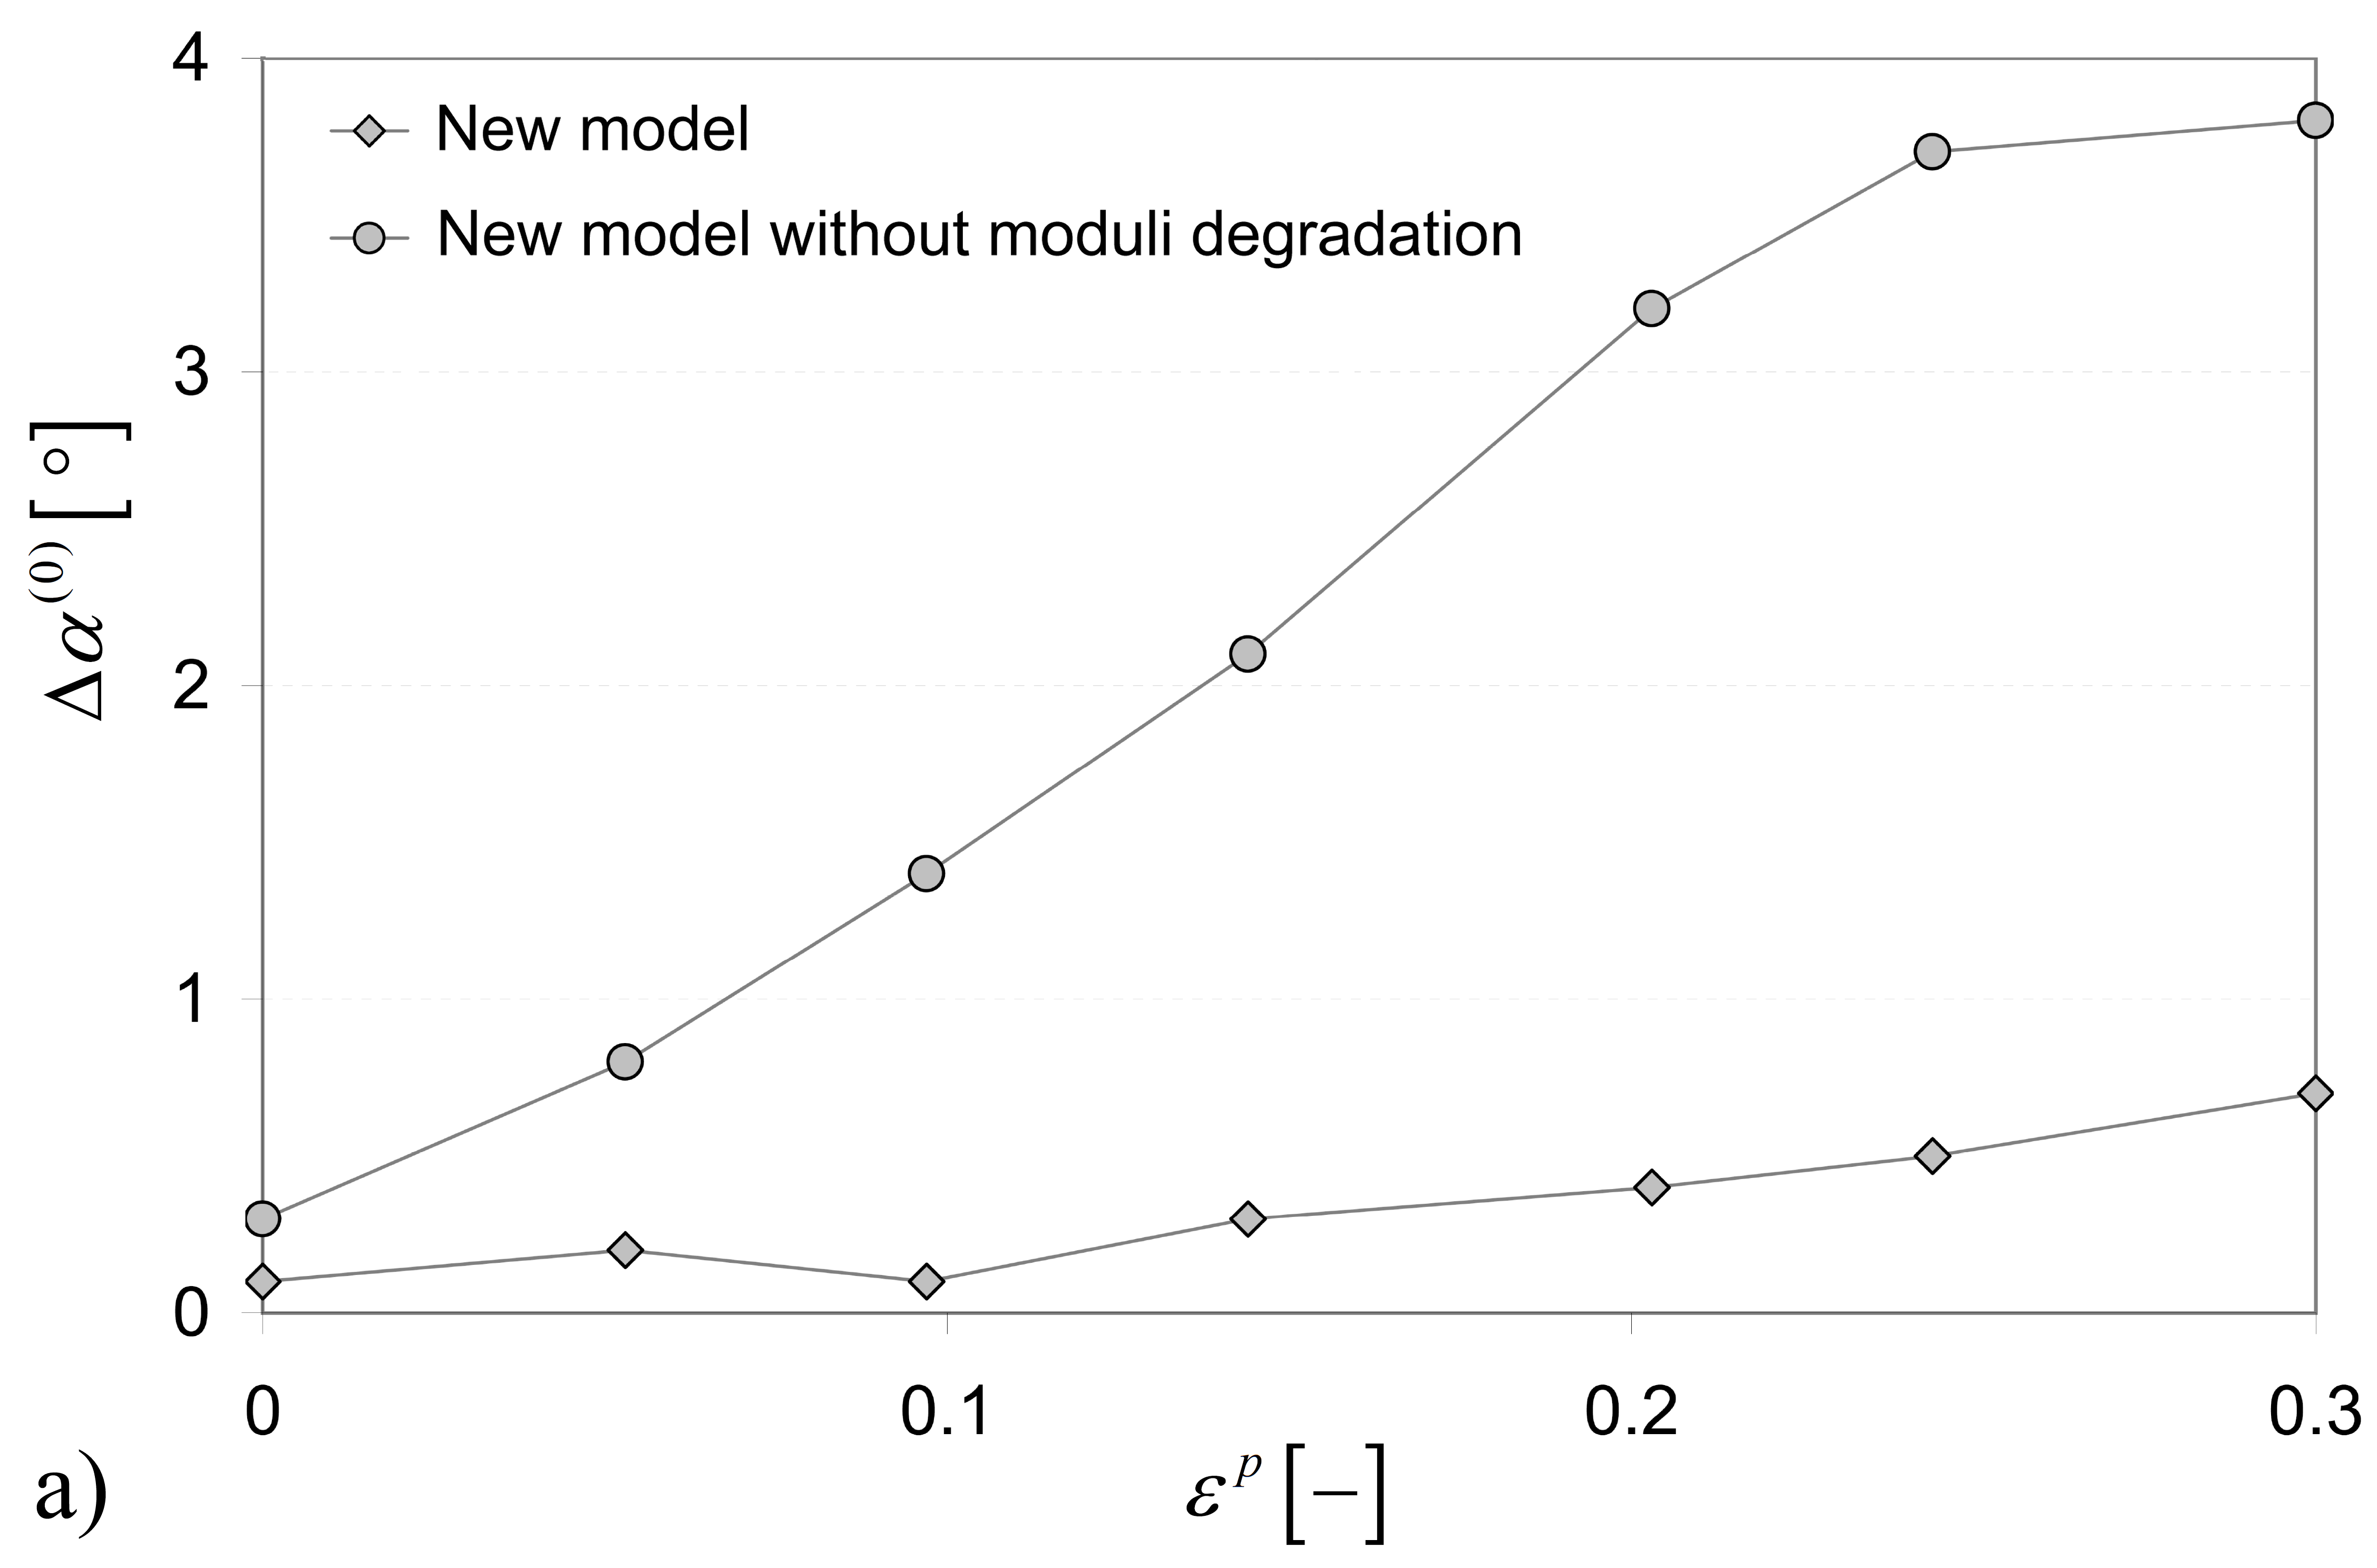 Errors in model predictions - rolling direction